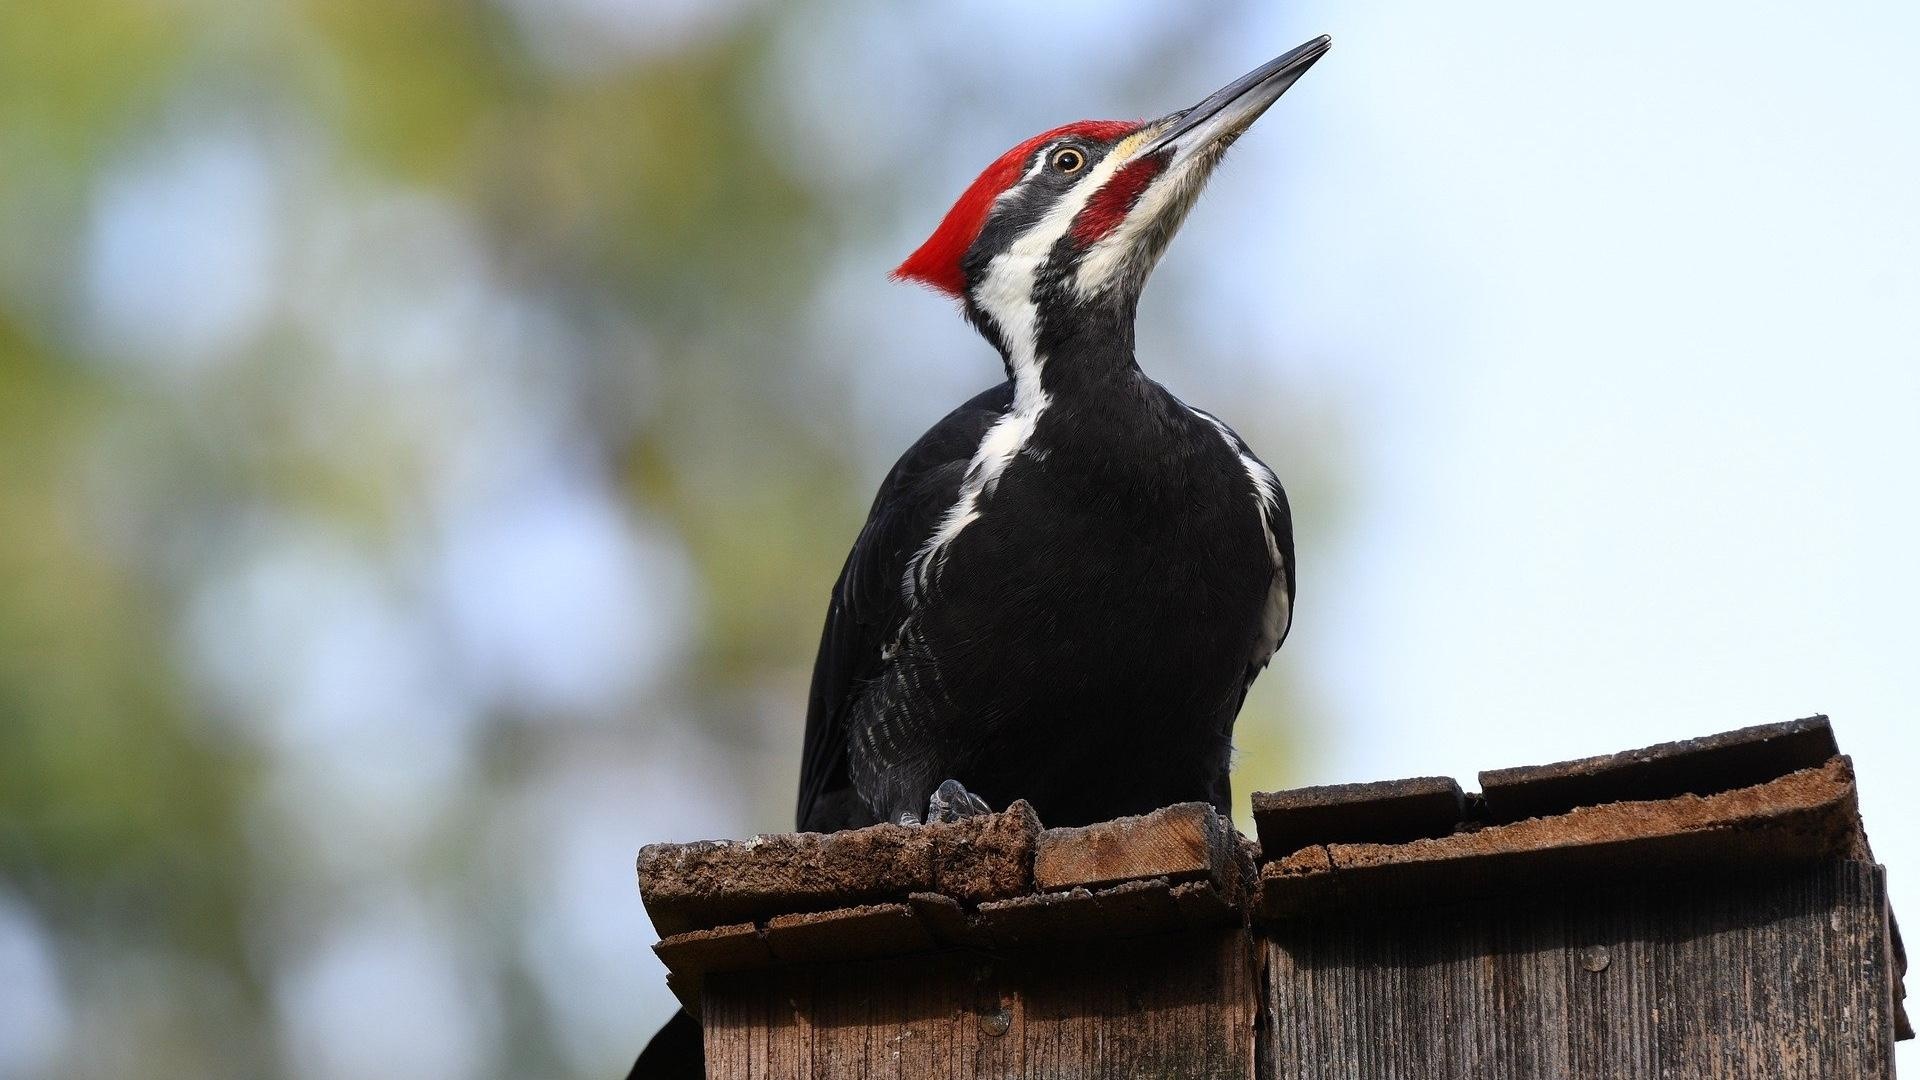 Pileated woodpecker, Animal of the day, Nature's marvel, Unique creature, 1920x1080 Full HD Desktop